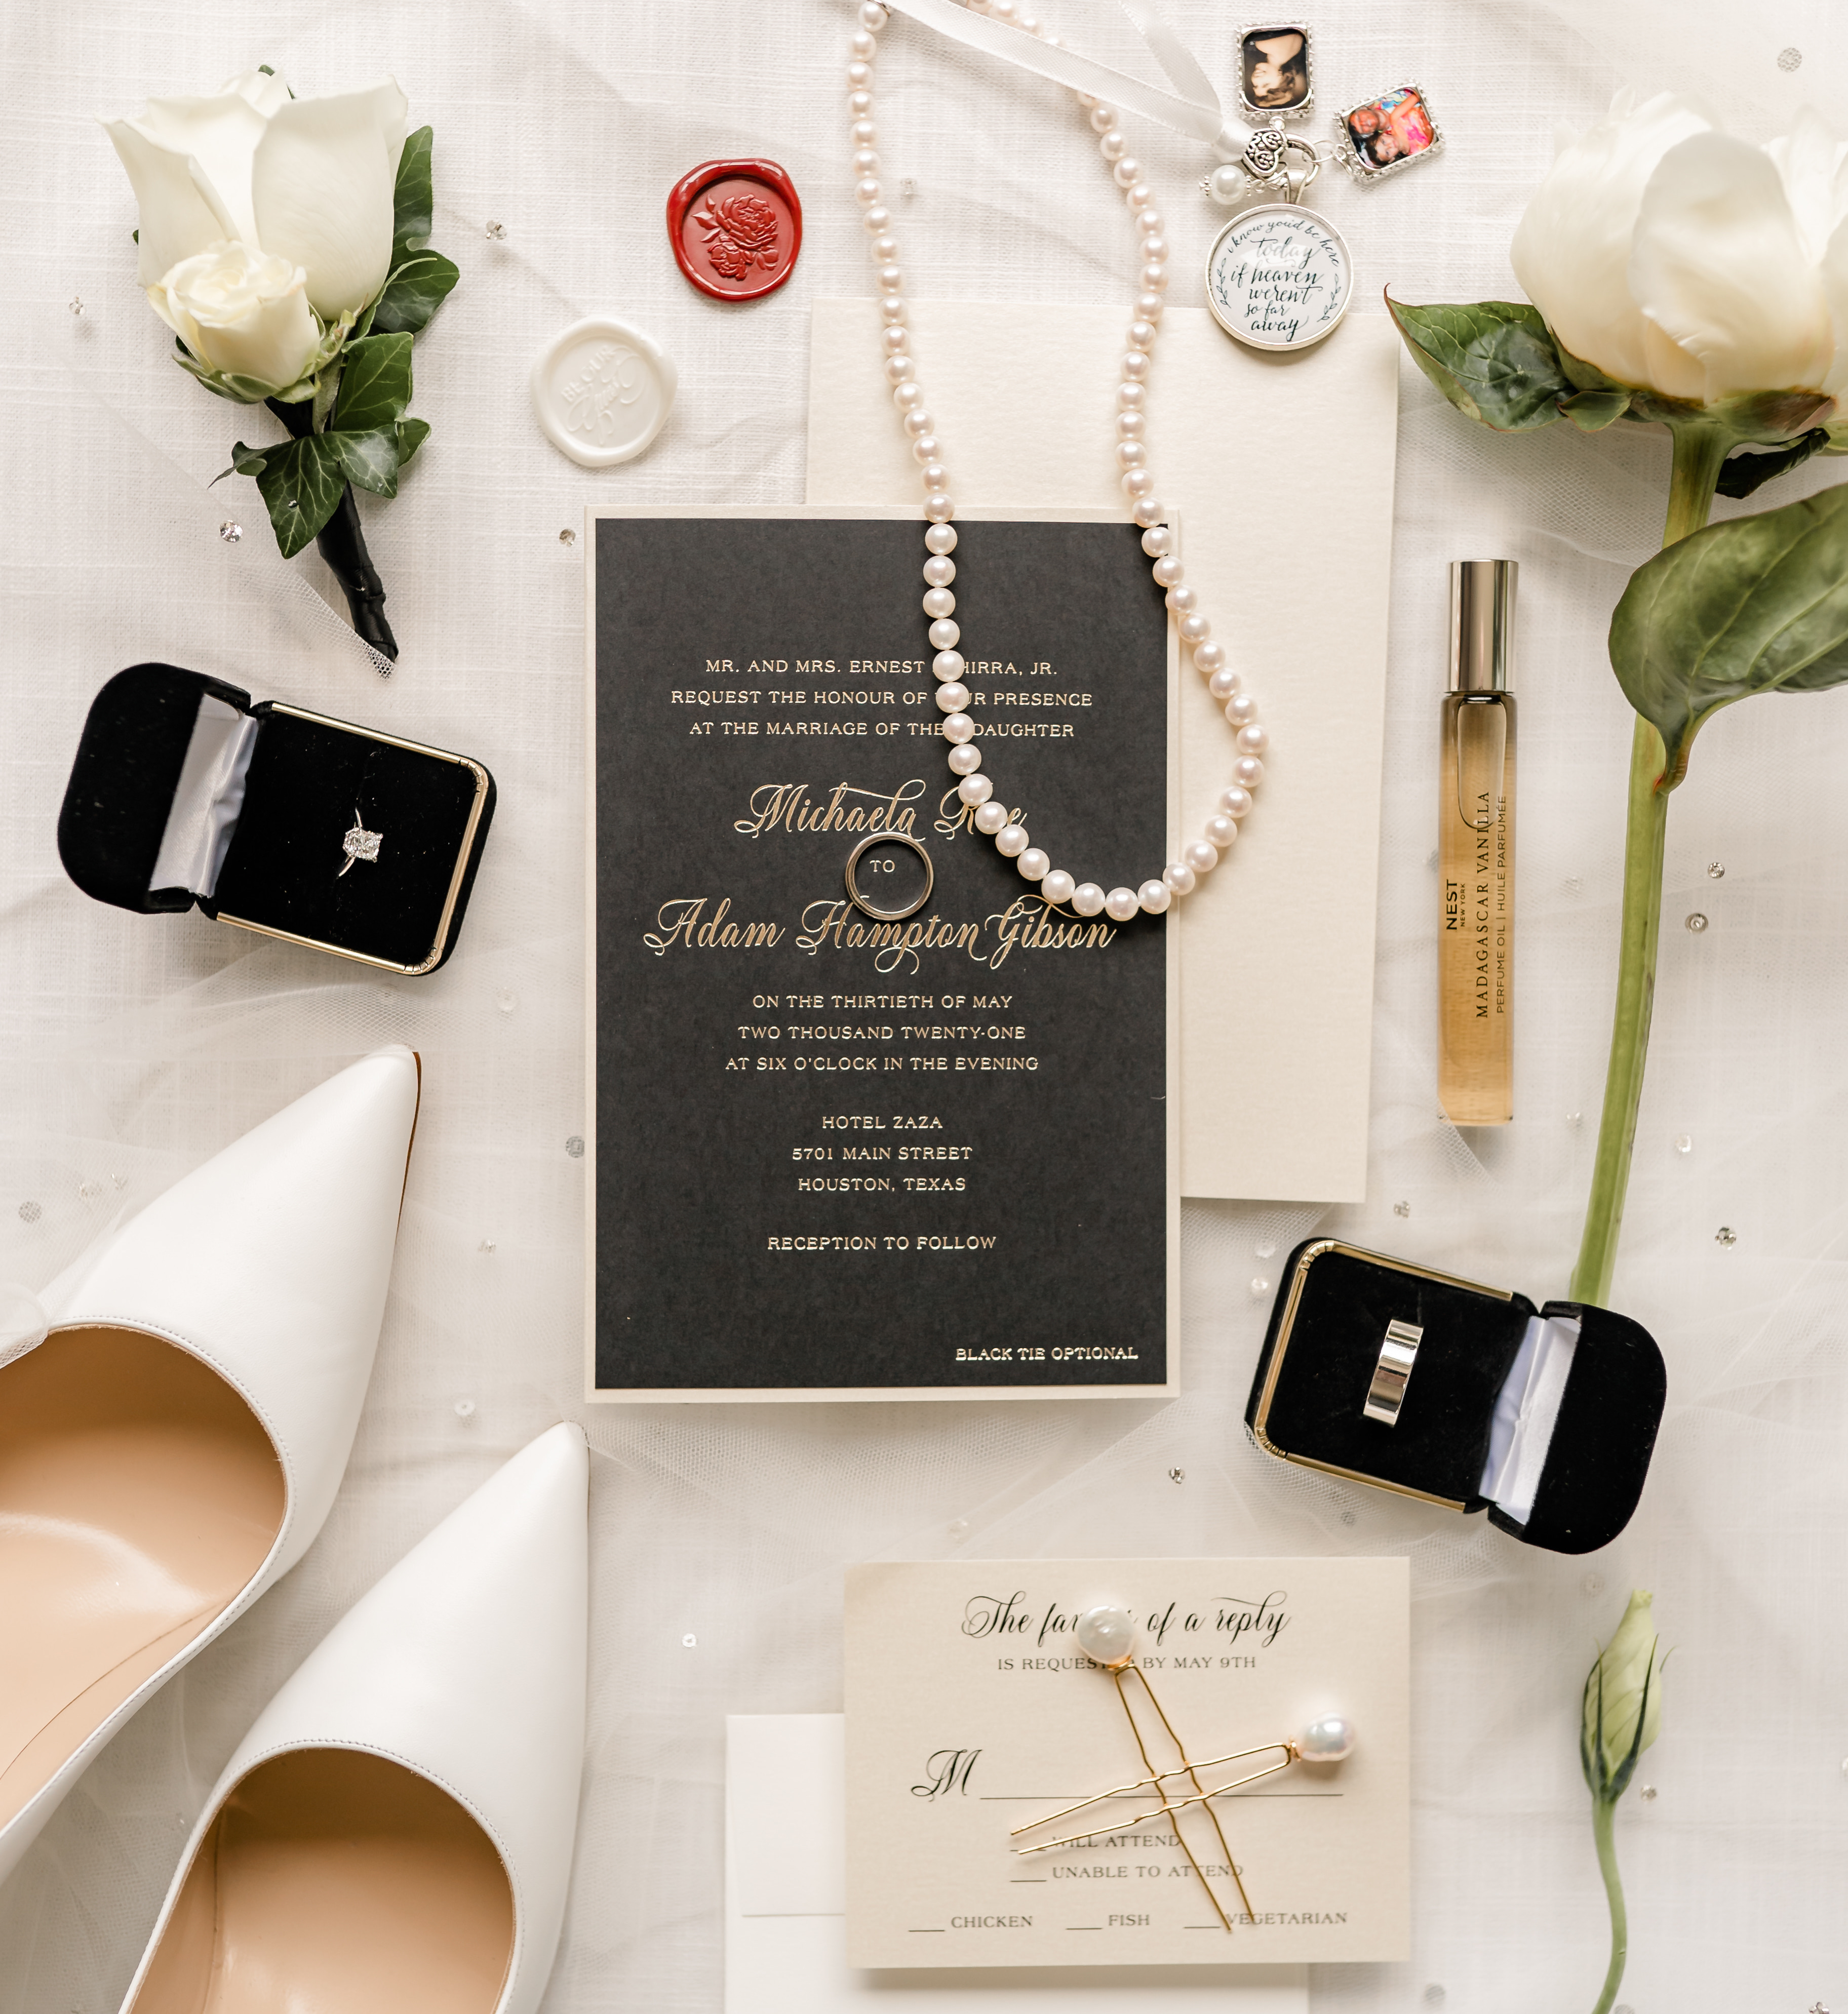 An invitation suite with black, cream and gold accents surrounded by a bride's white heels, an open box with a diamond engagement ring and fresh white florals.